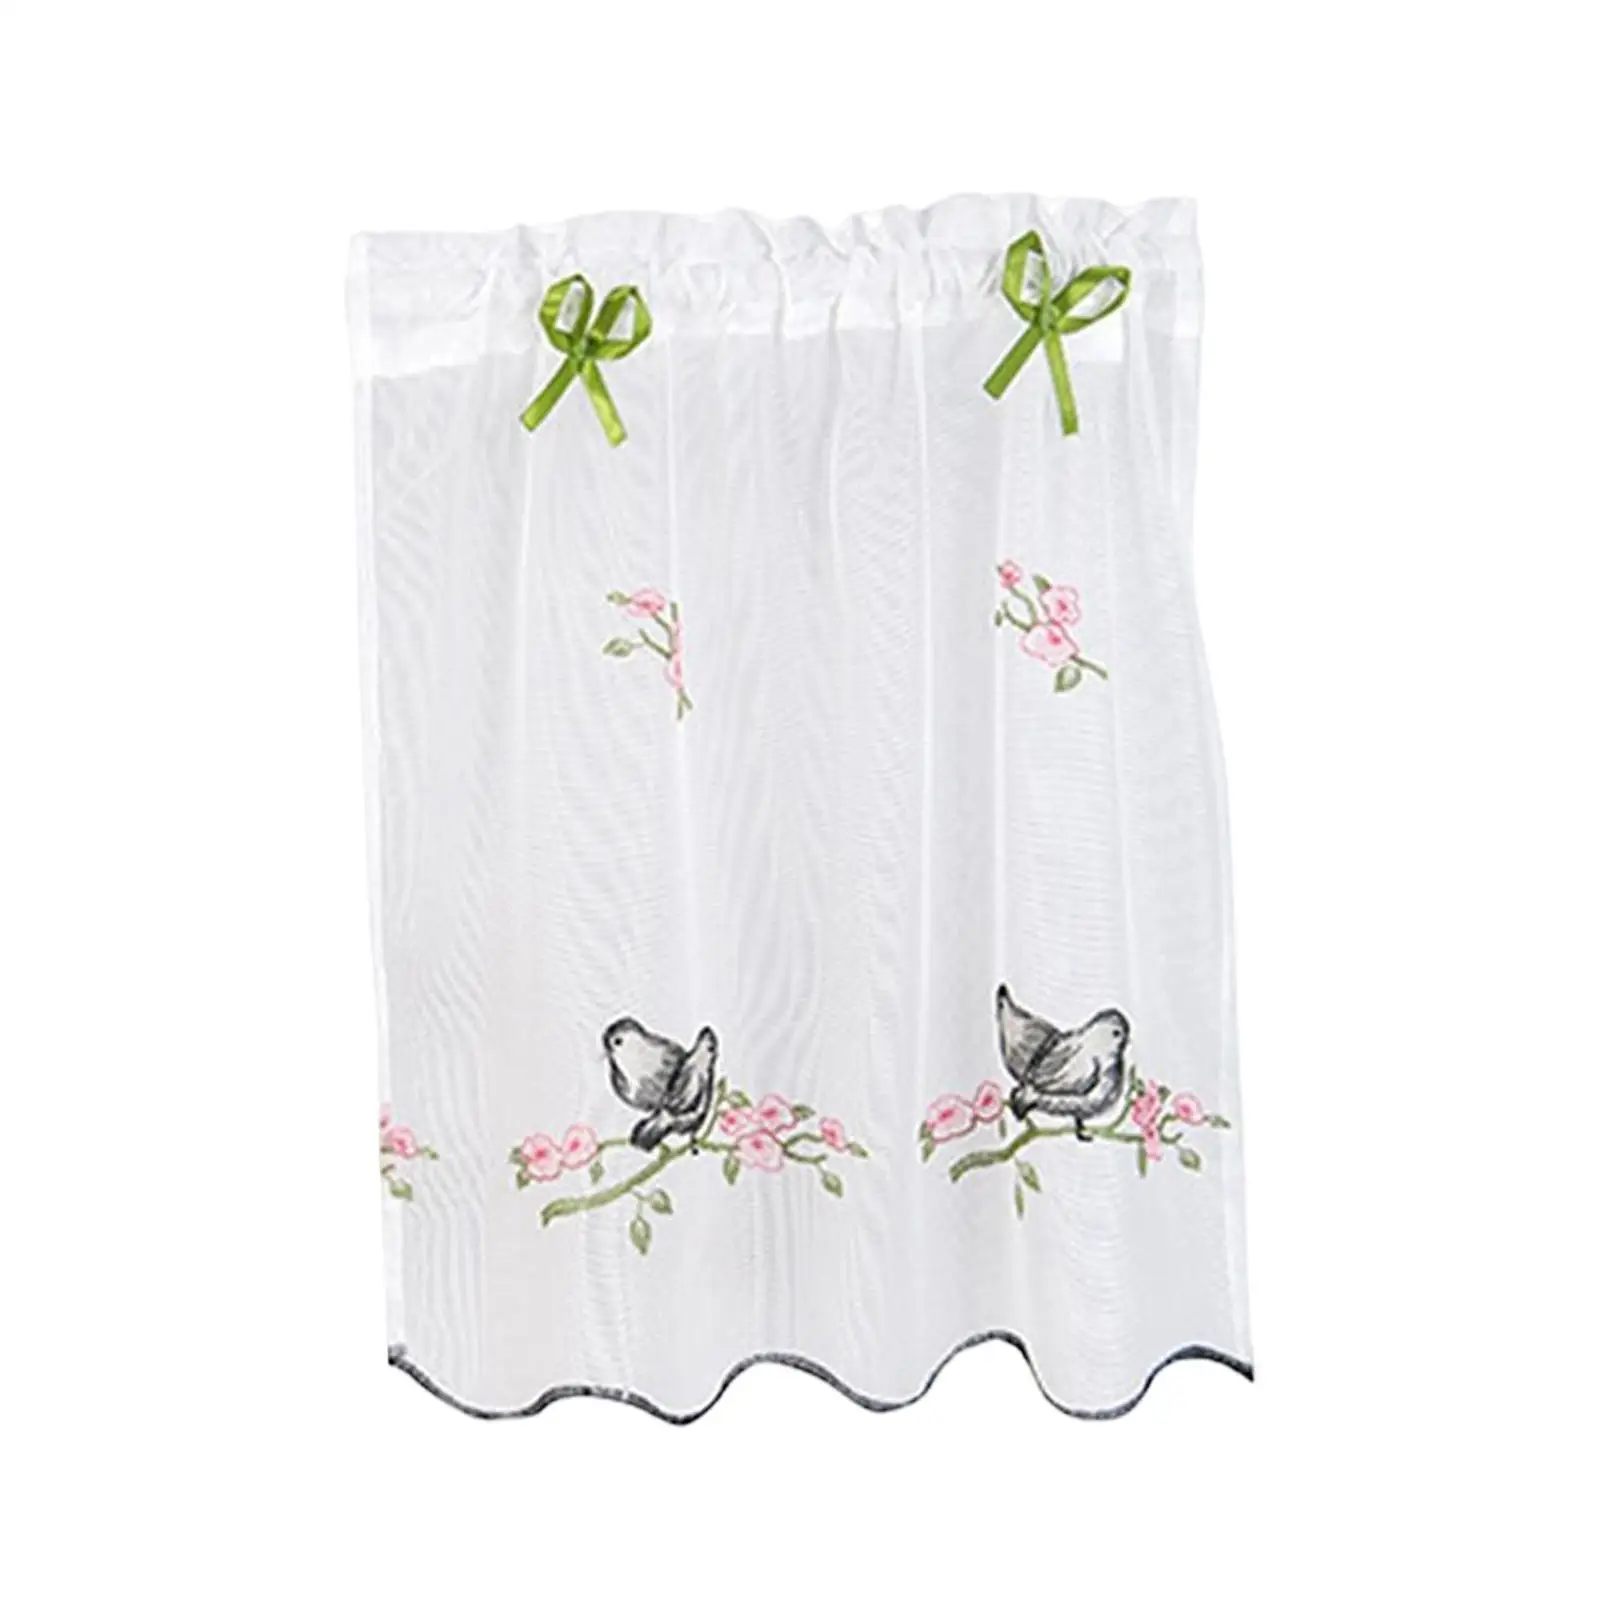 Rod Pocket Short Curtain Drapes Half Window Covering Embroidered Half Curtain for Farmhouse Bedroom Kitchen Living Room Cafe